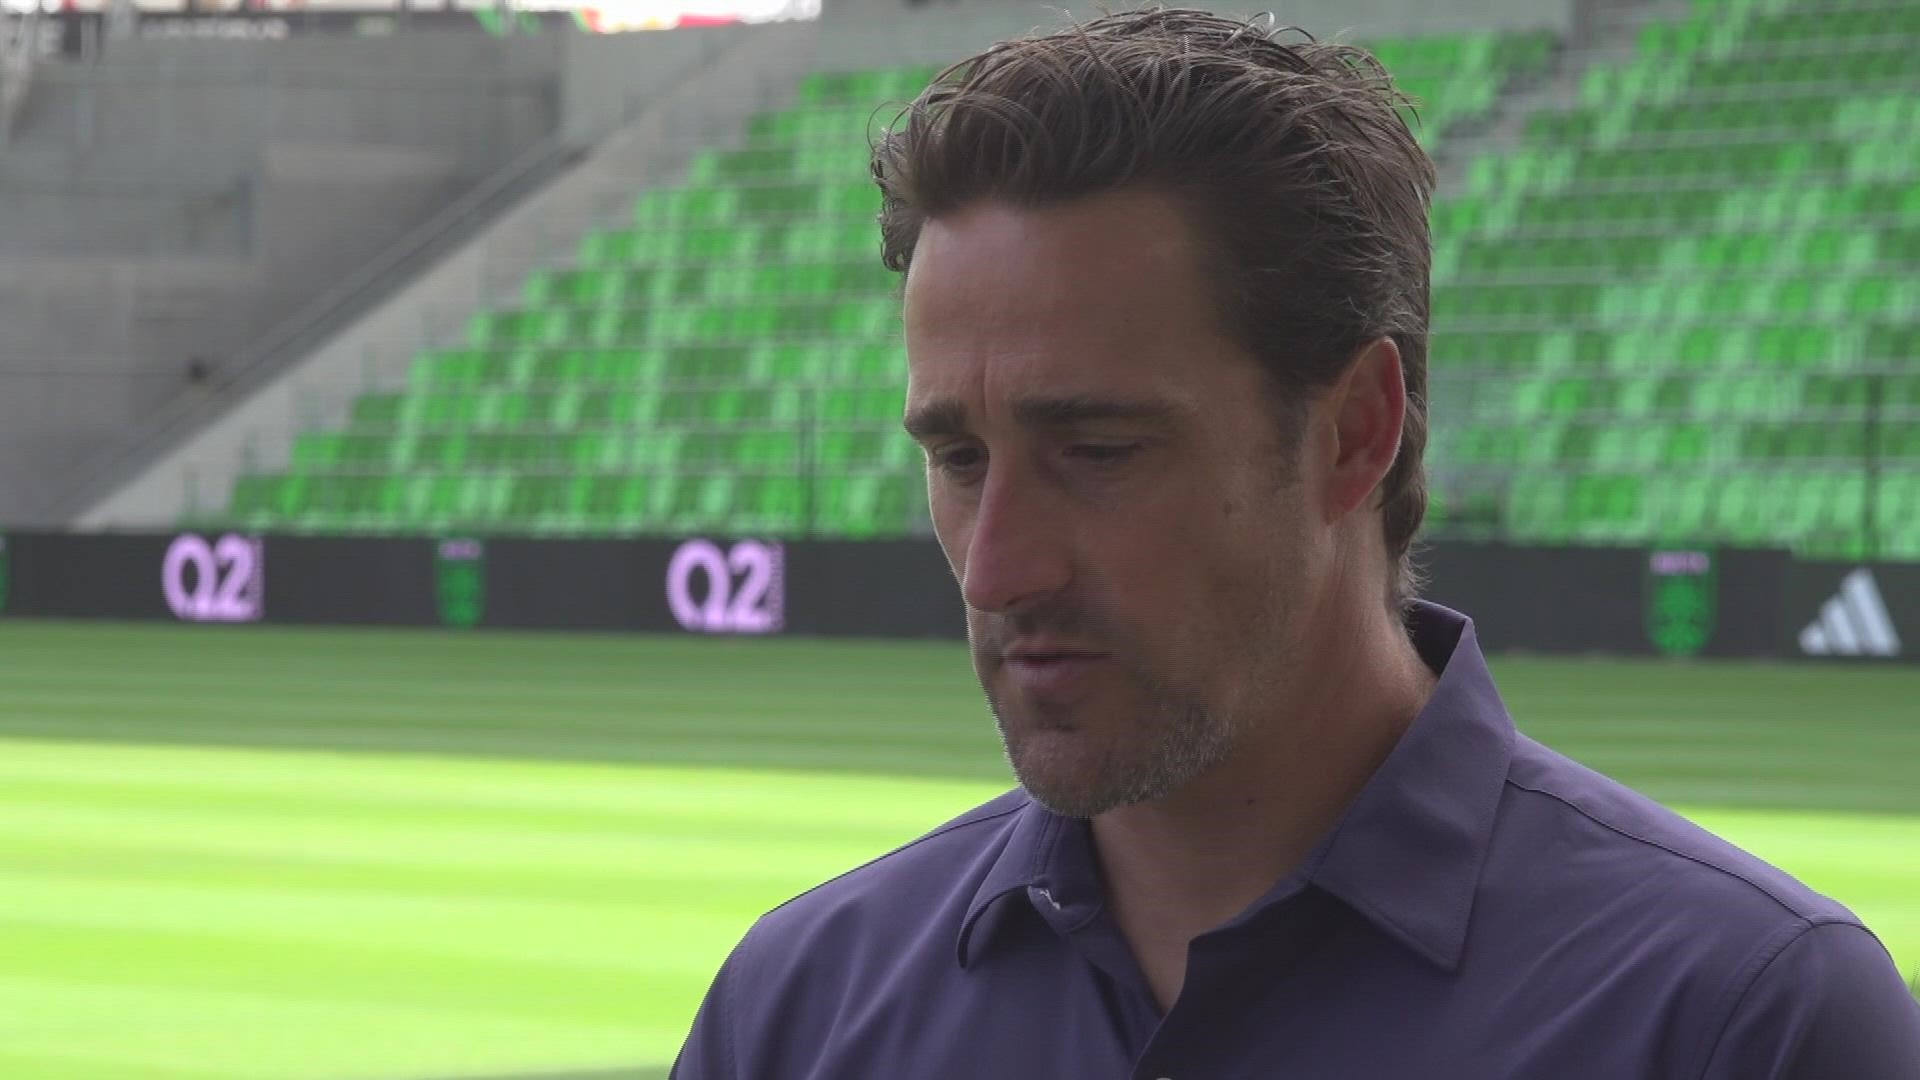 With the U.S. Women's National Soccer Team headed back to the Q2 Stadium in April, Josh Wolff shared his thoughts with KVUE.